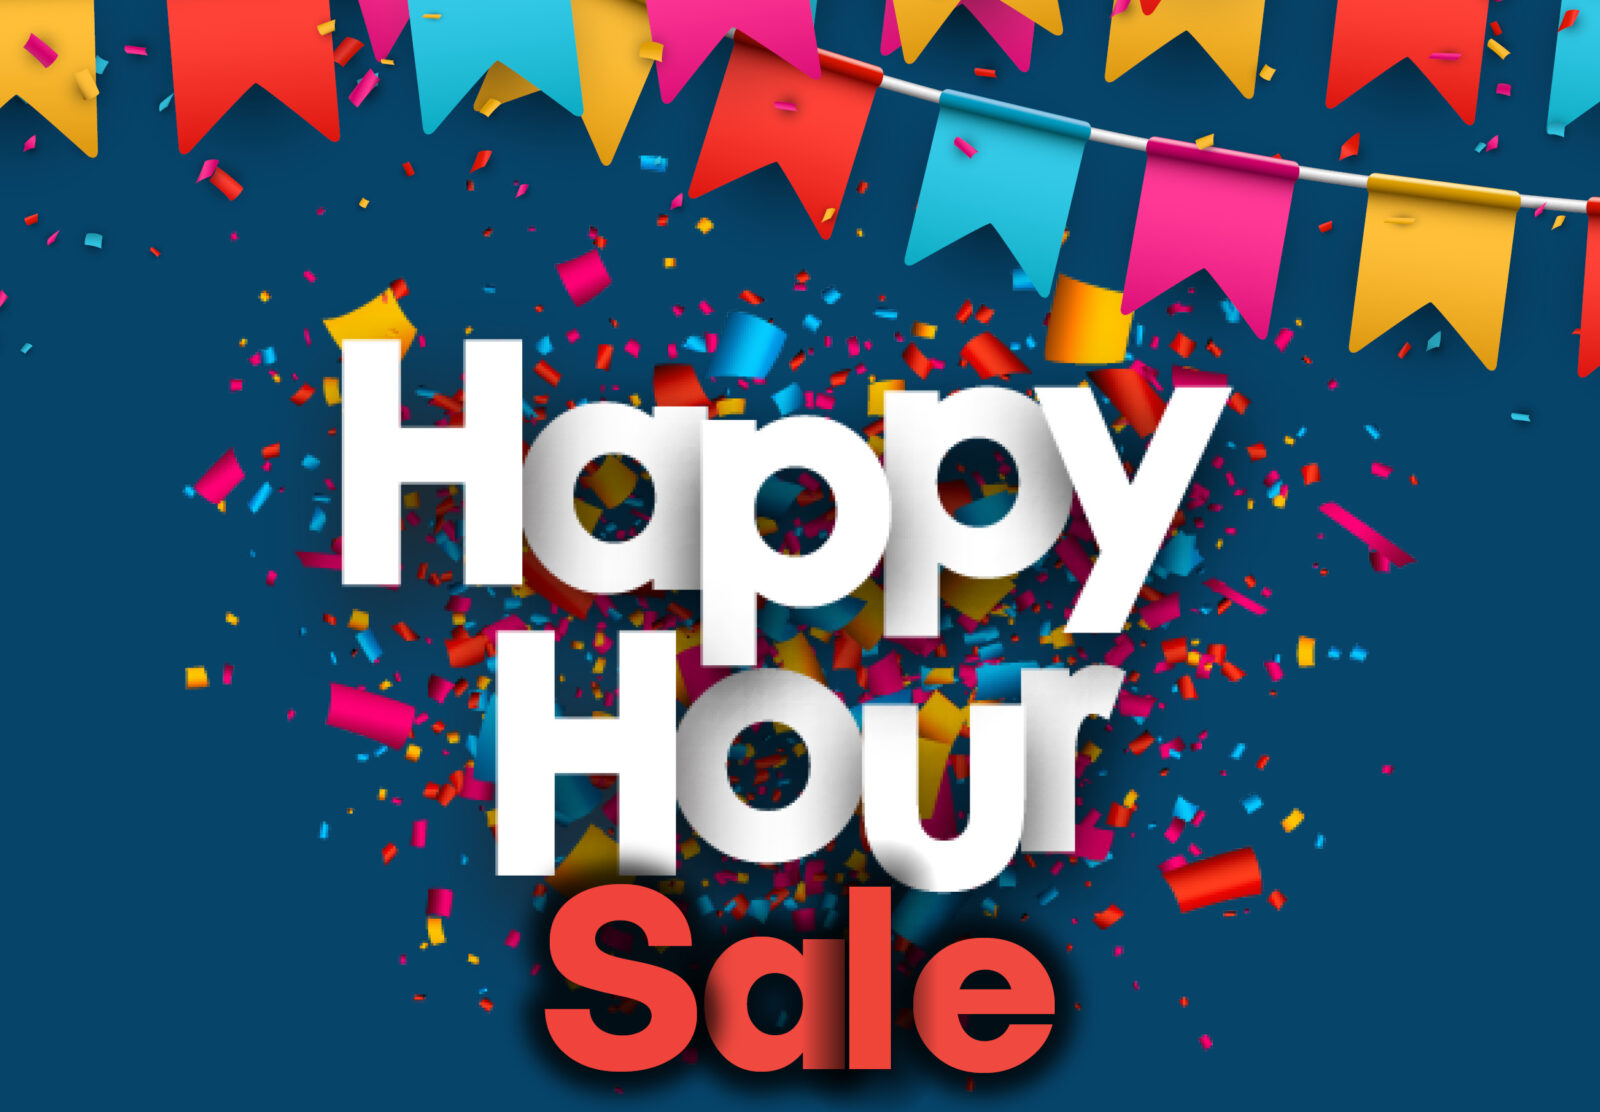 Happy Hour Sale at the Marketplace Gift Shop